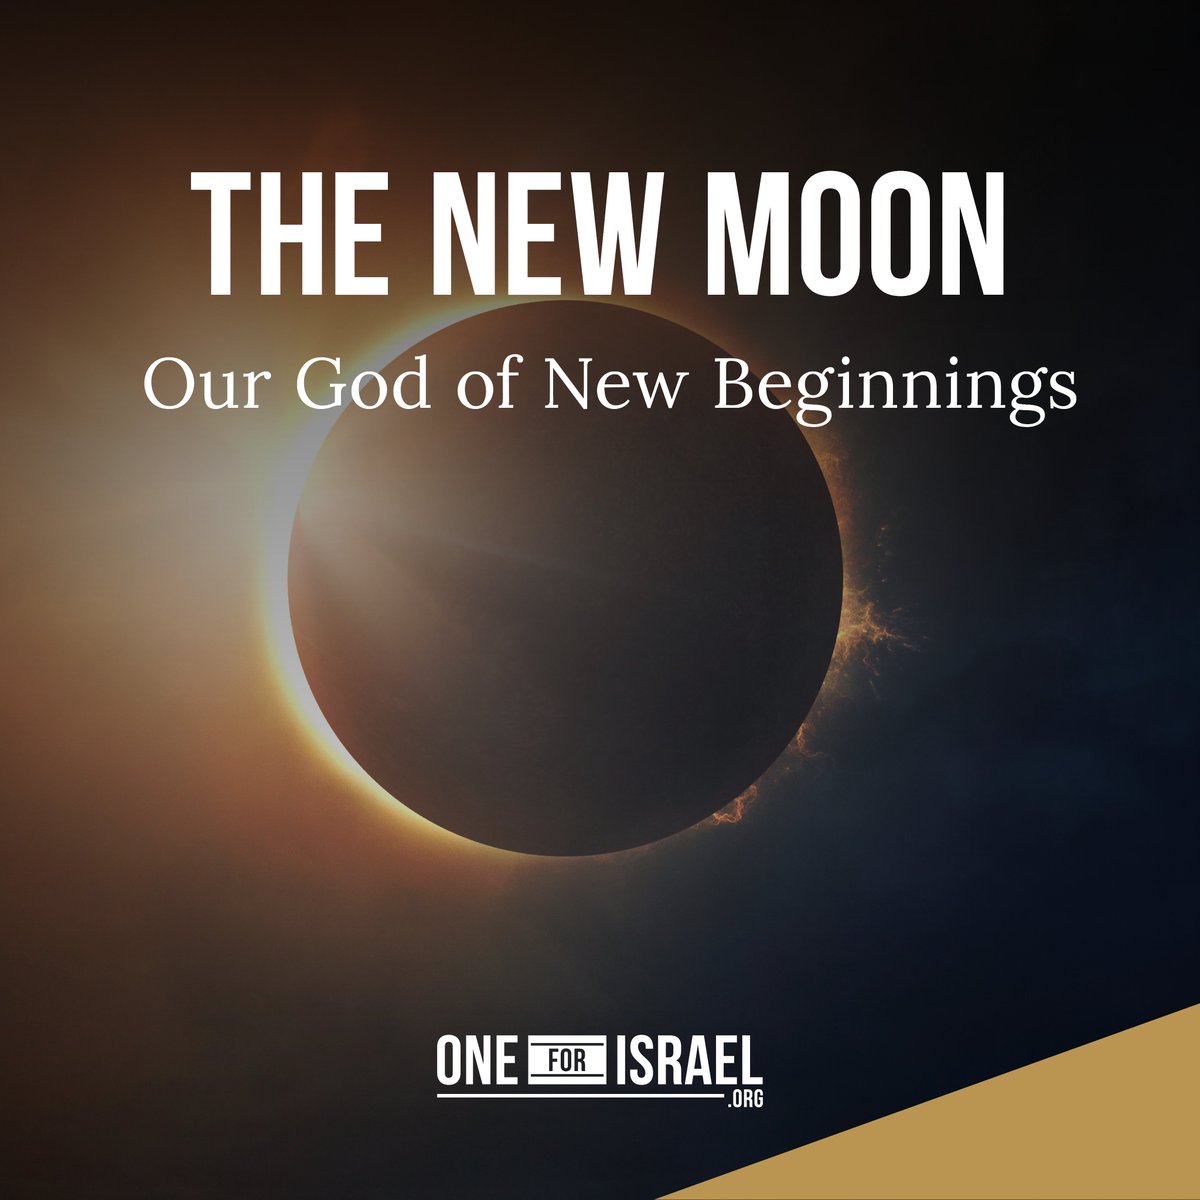 At sunset on April 8, 2024, the new biblical year begins. It's the first day of the first month, the Hebrew month of Nisan. And it's even more significant with this solar eclipse! Nisan is the month of Passover, which will happen when the moon is full. But today, we wish you a…